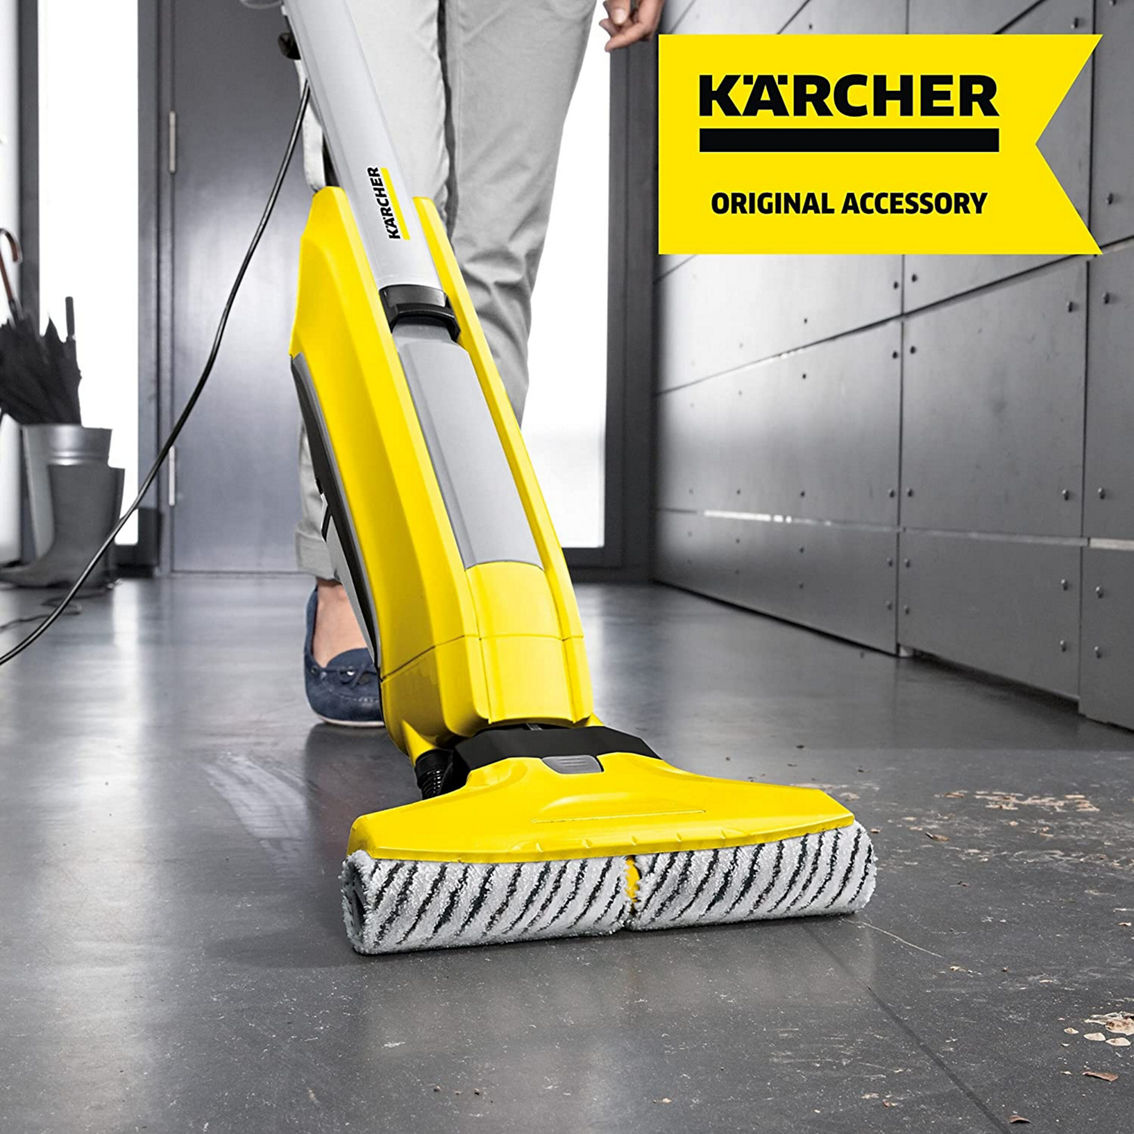 Karcher Floor Cleaner FC Stone Rollers 2 pk. - Image 3 of 4